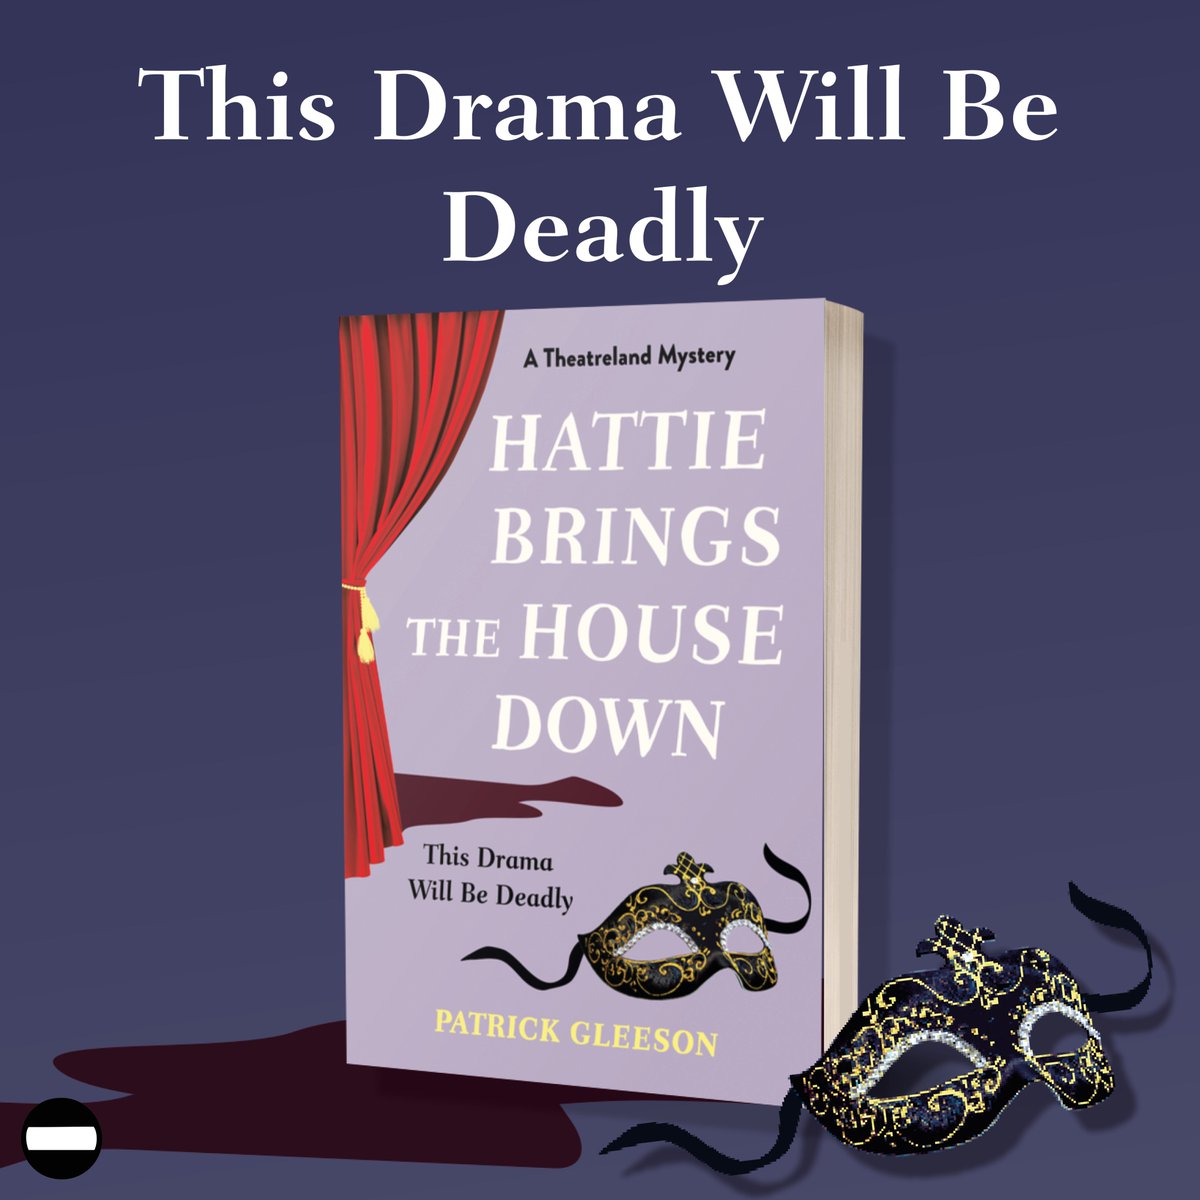 In the heart of London's Tavistock pub theatre, seasoned stage manager Hattie is thrust into chaos when a body is discovered backstage and a priceless mask vanishes. Now she must navigate the dysfunctional cast to uncover the truth before opening night. Out 9th May!